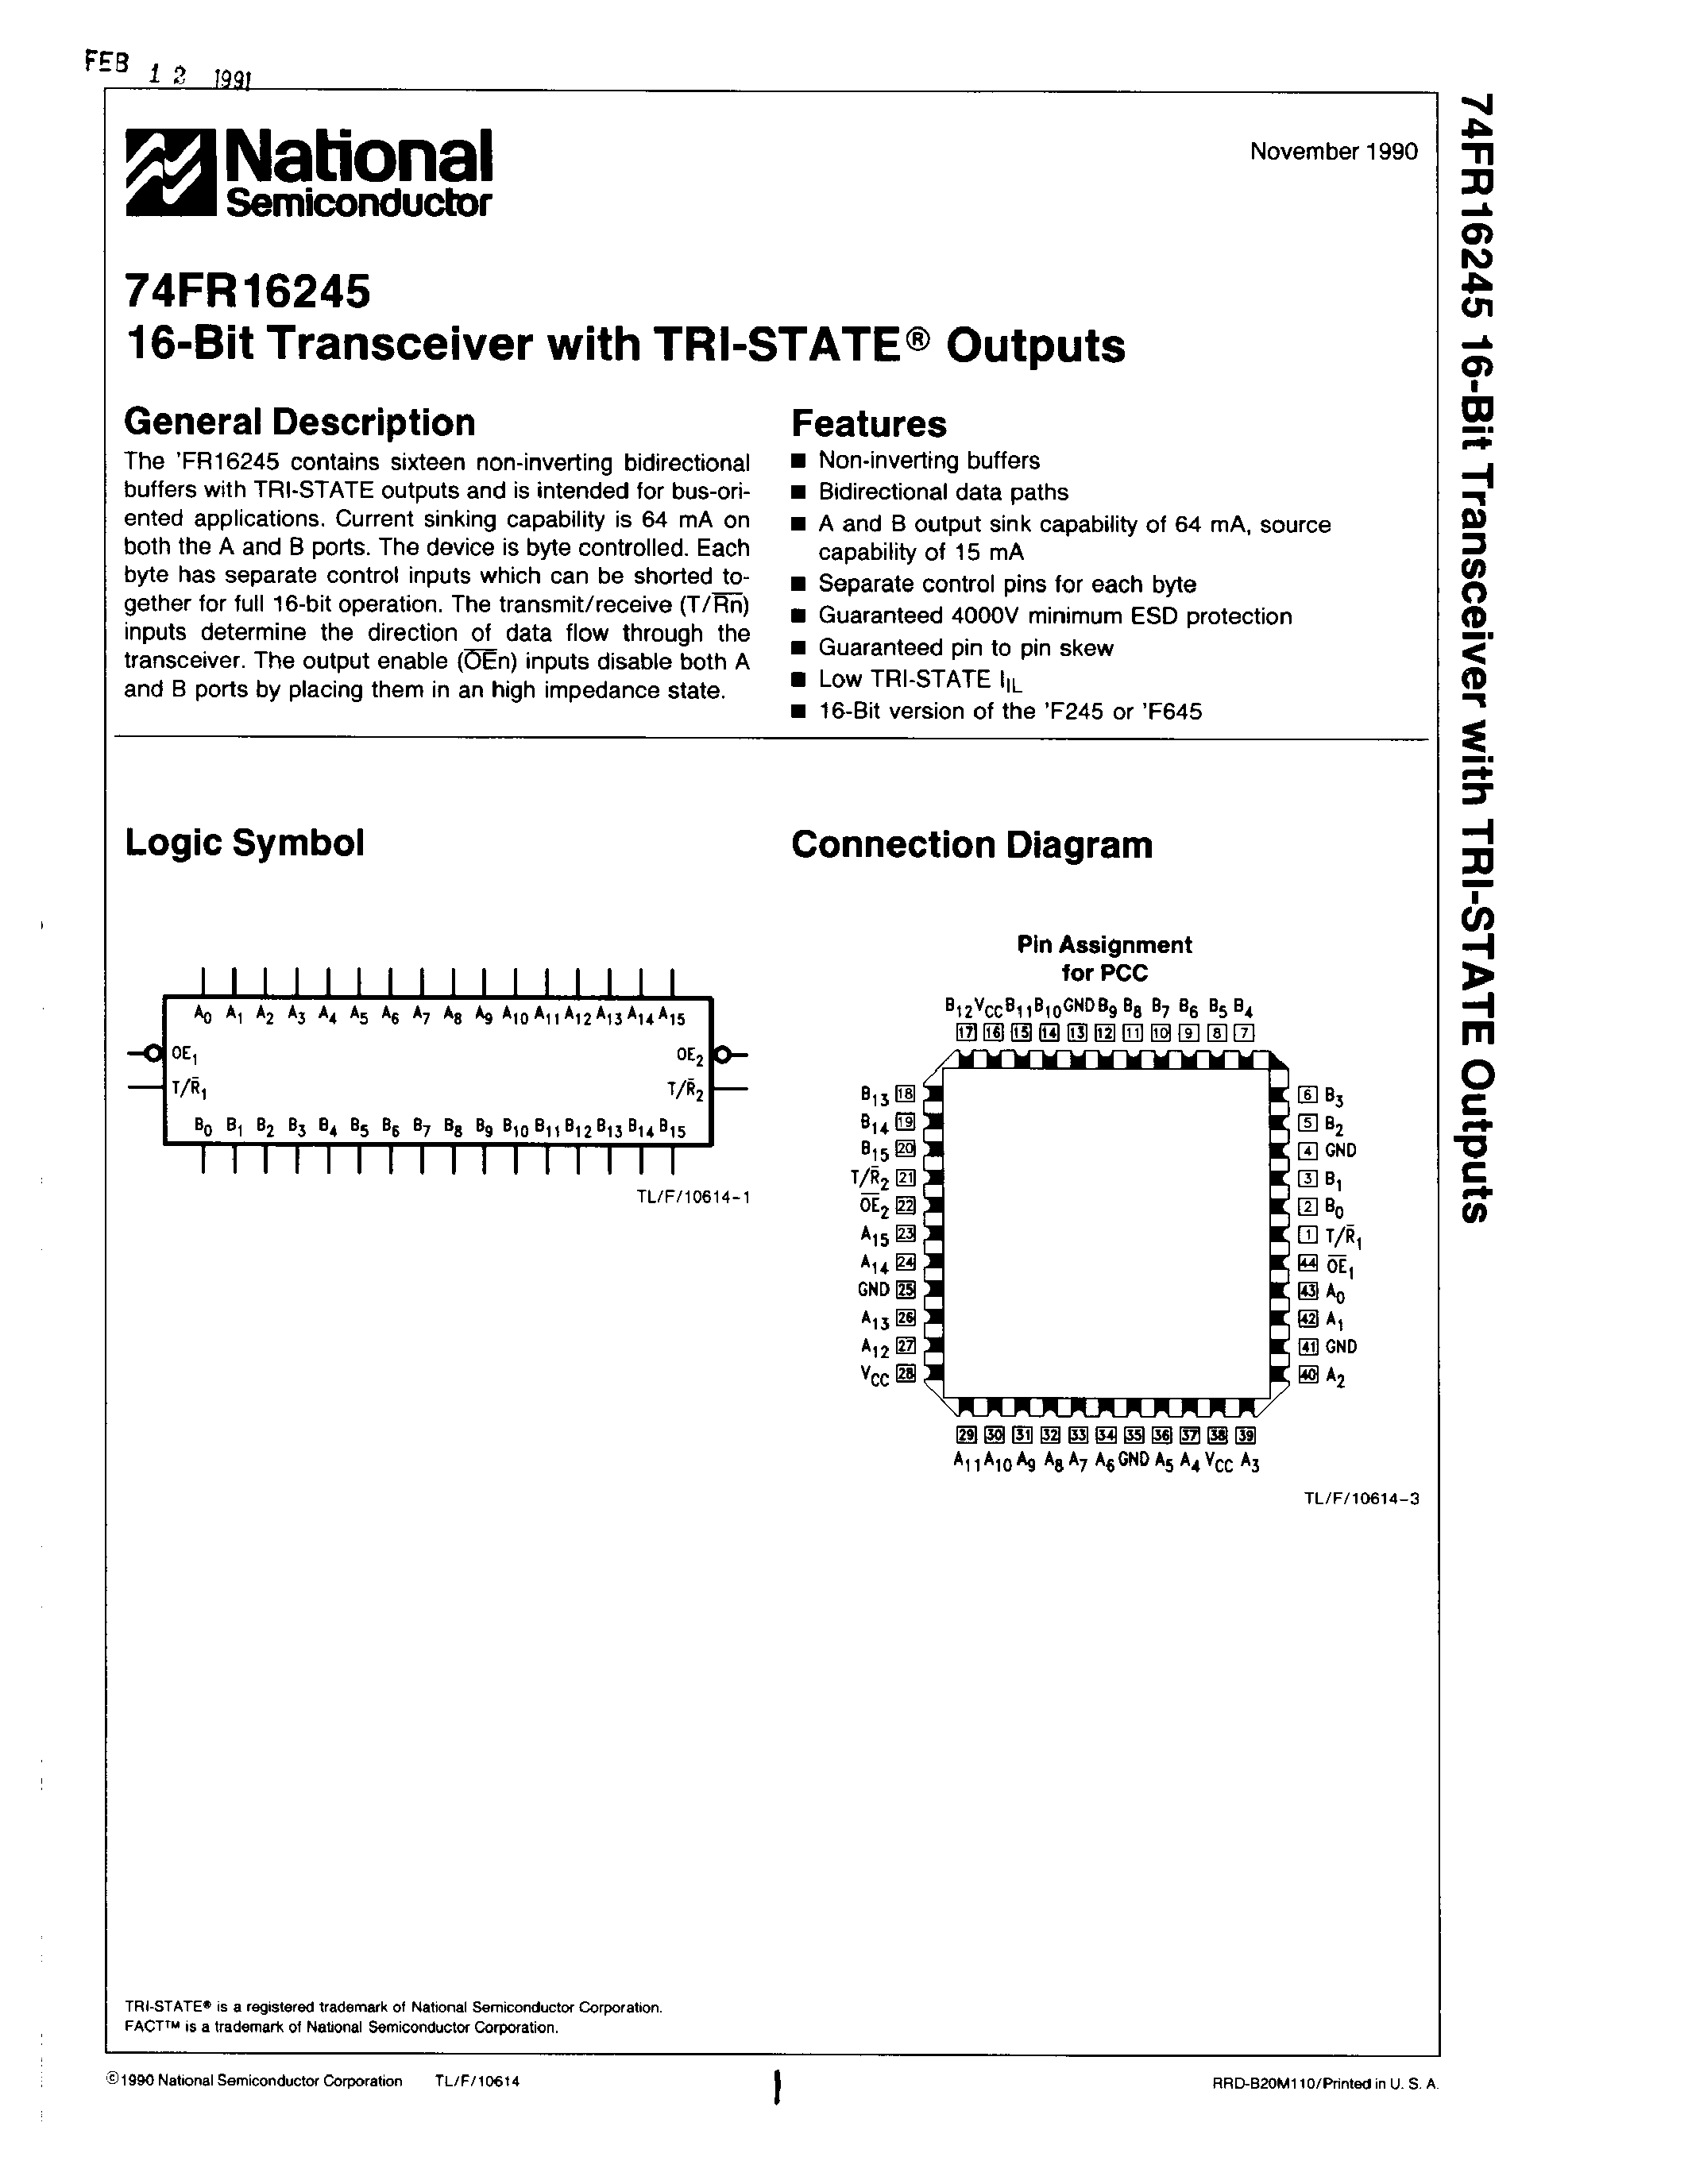 Datasheet 74FR16245Q - 16-Bit Transceiver with TRI-STATE Outputs page 1